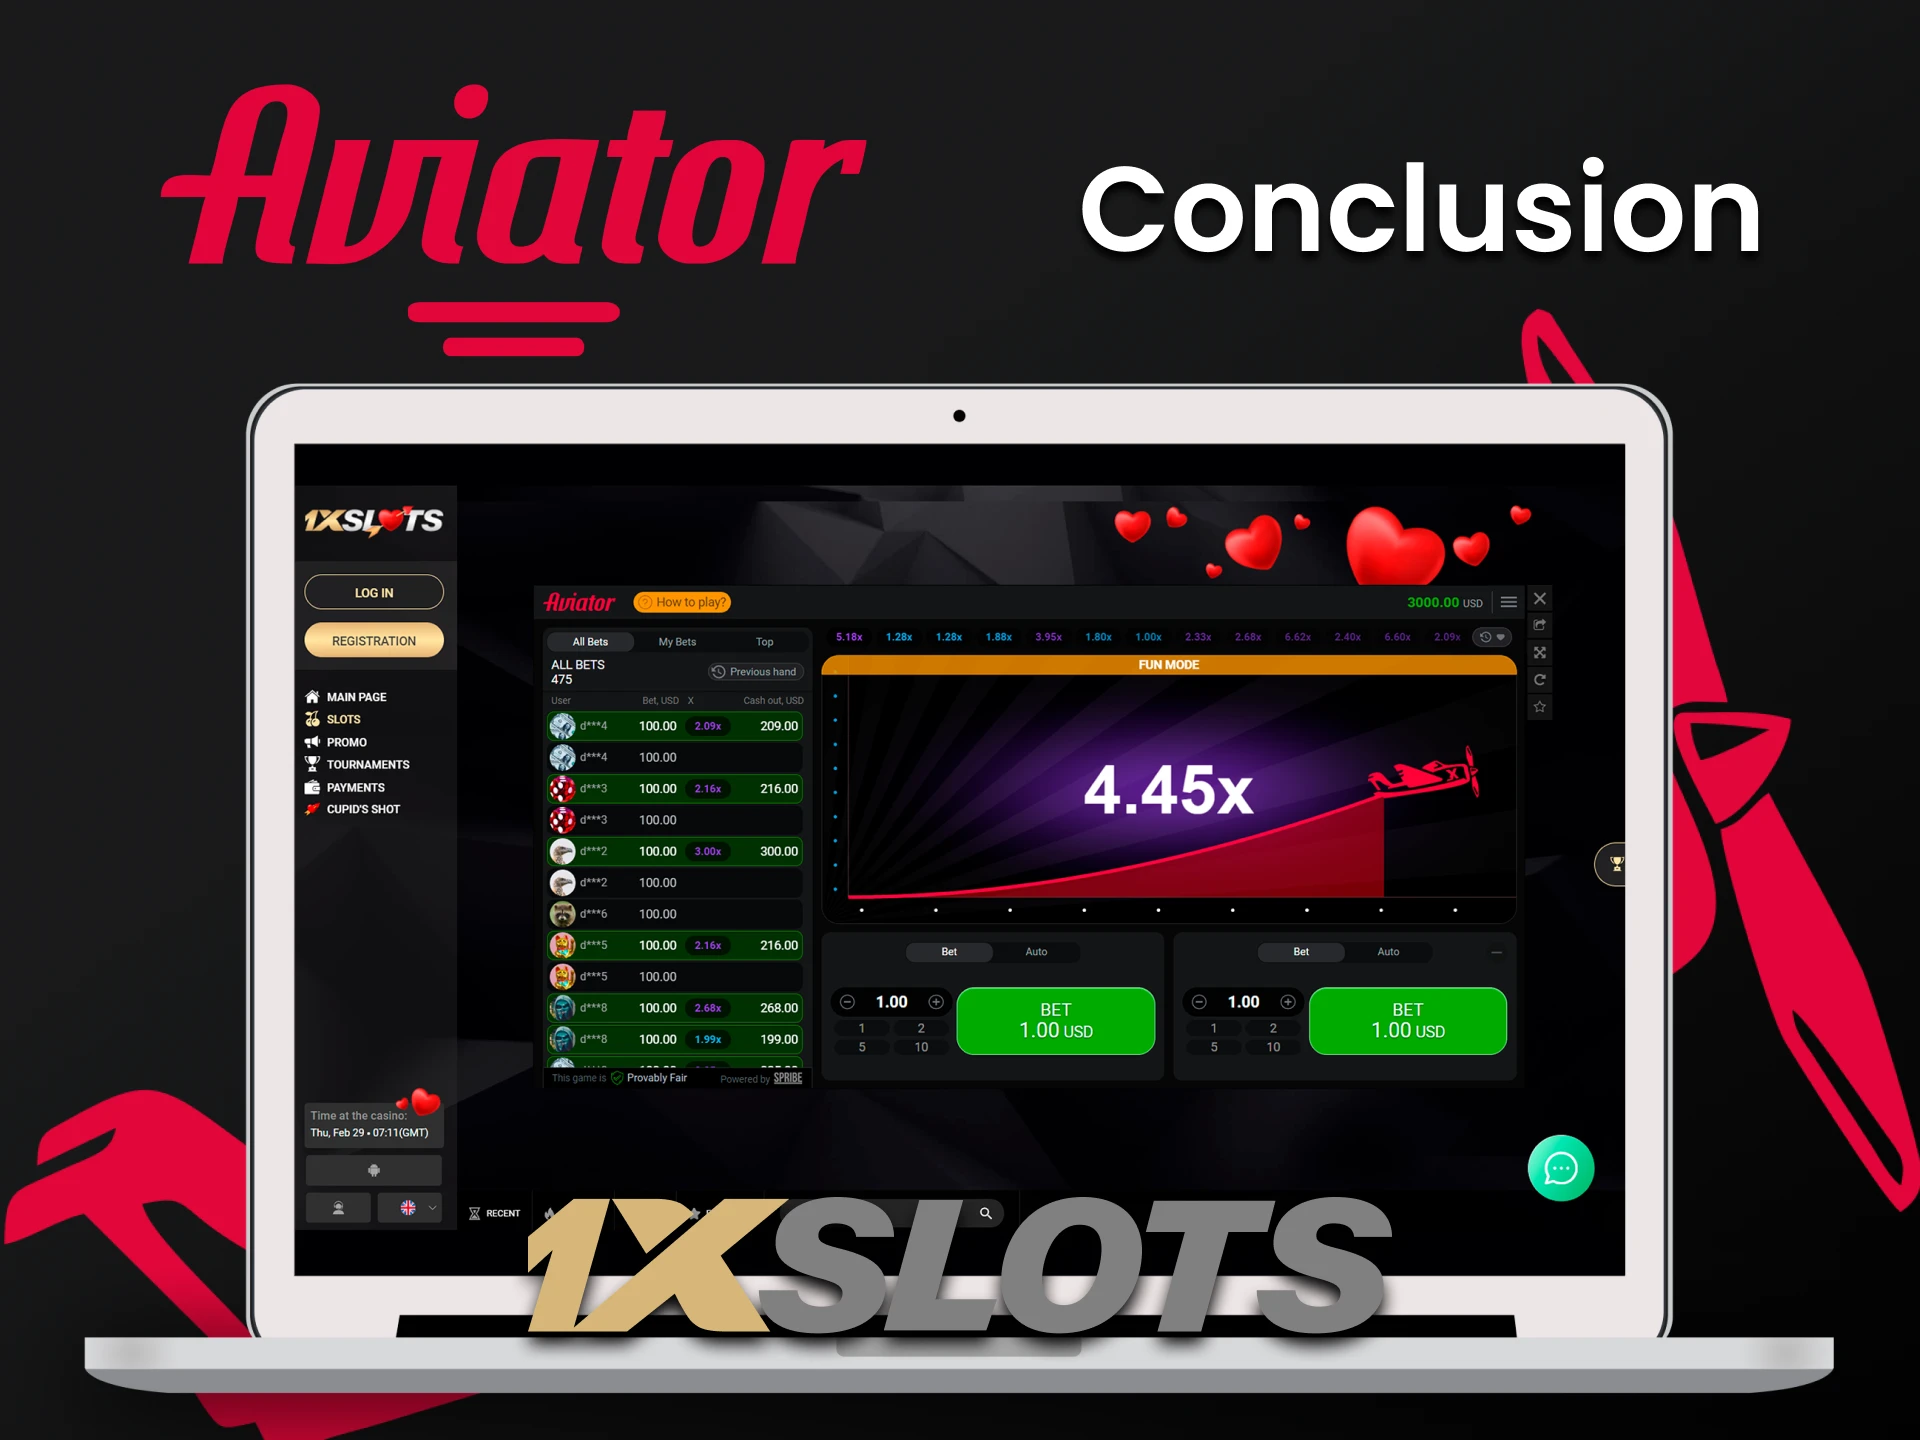 1xslots is the perfect choice for playing Aviator.